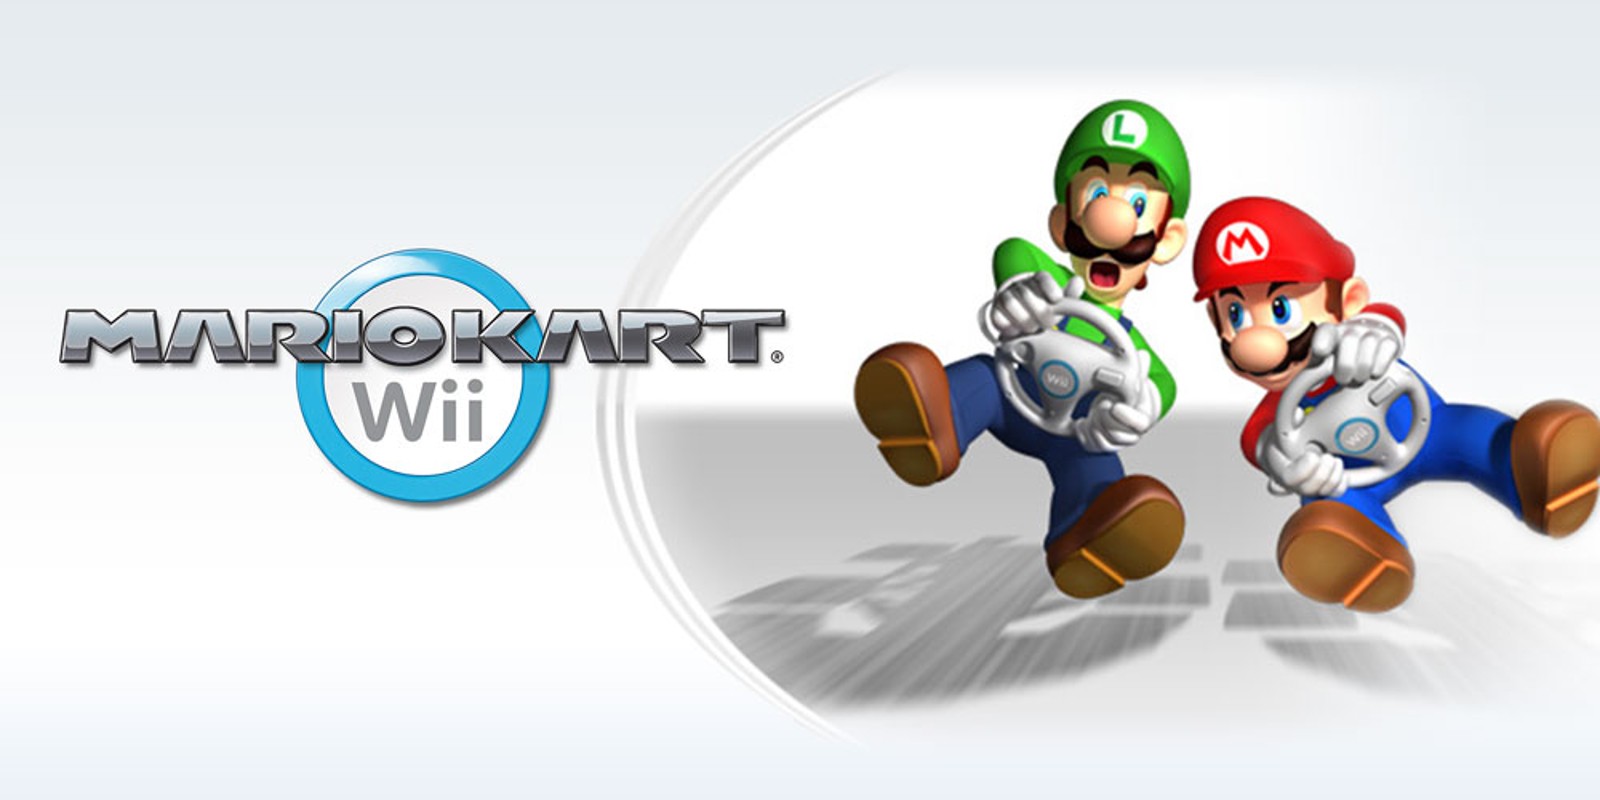 Check Out the Best Selling Wii Games